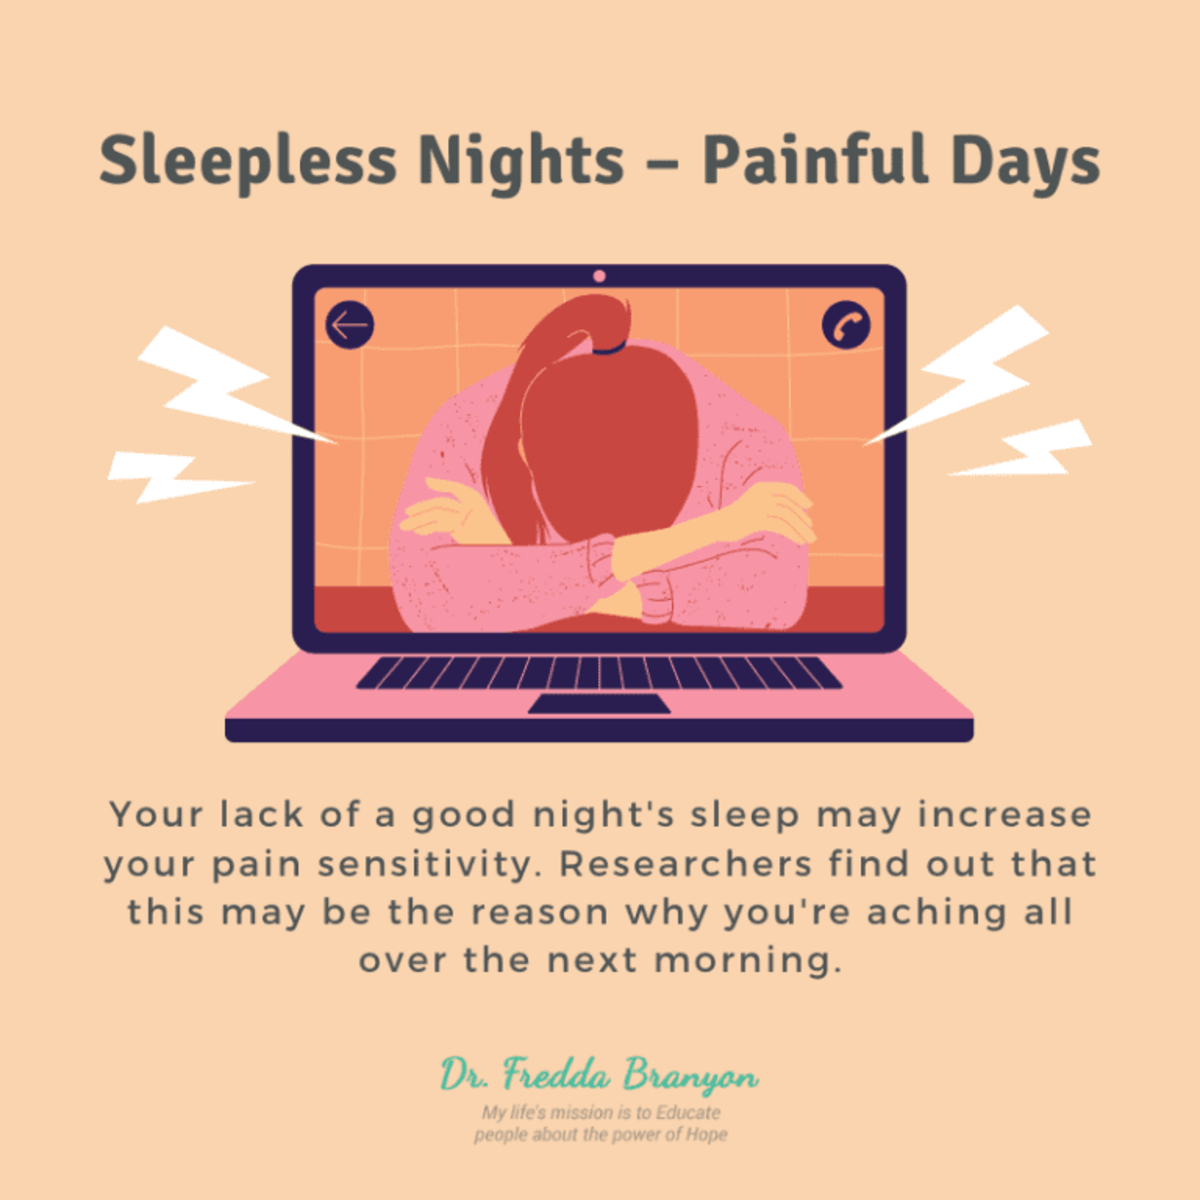 Sleepless Nights and Painful Days: Finding Relief in Rest